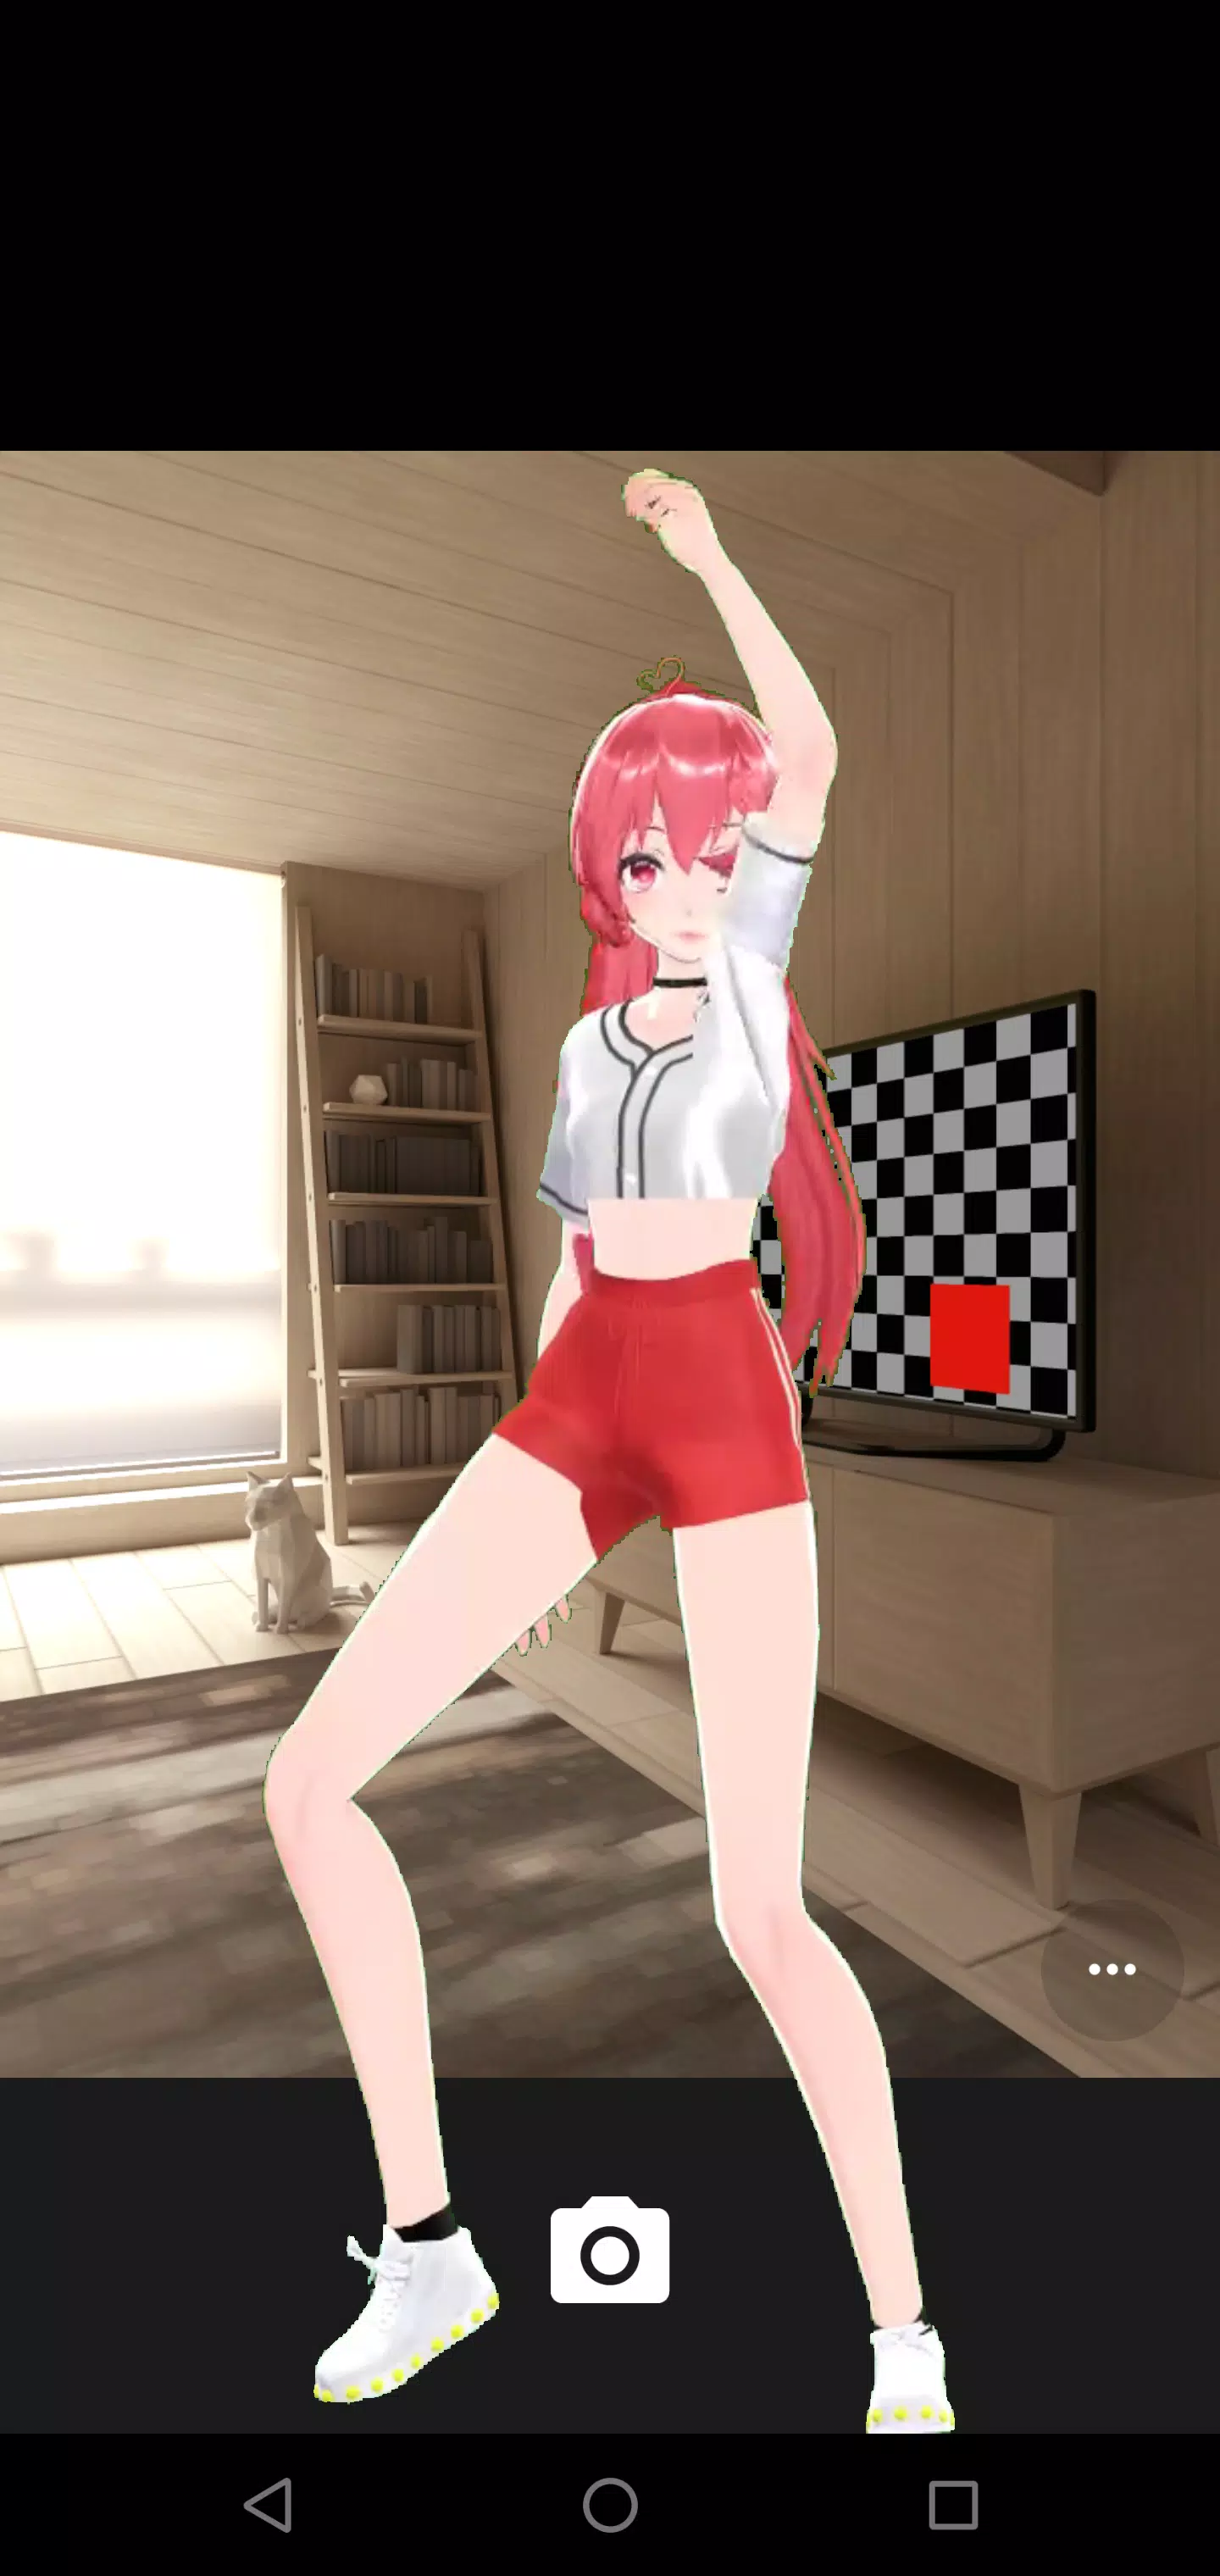 Anime/MMD/Miku Dance Transpareent Video Wallpaper APK for Android Download